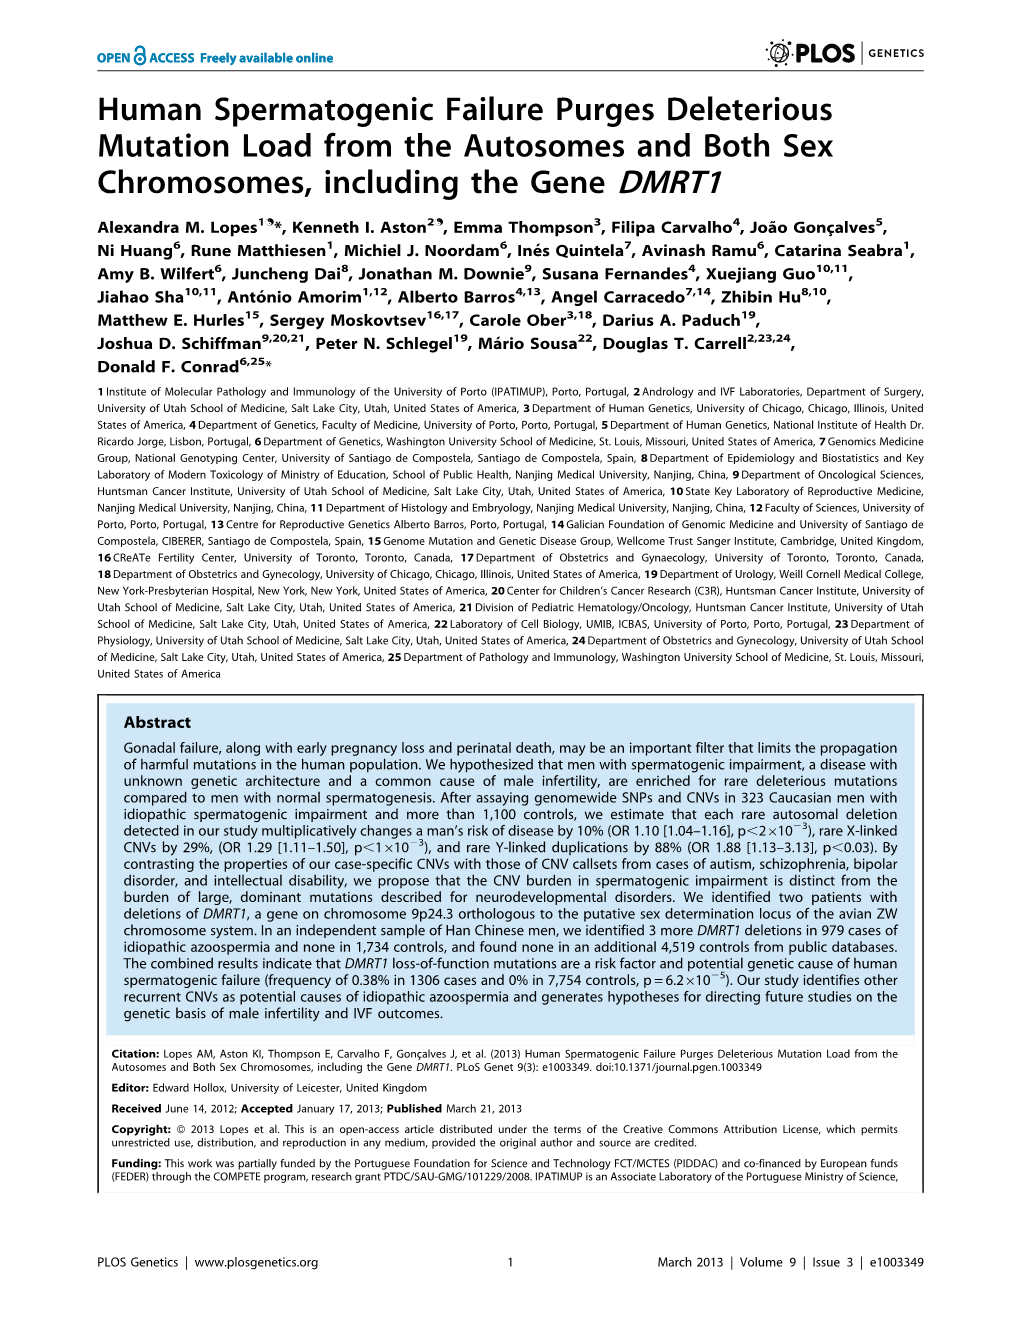 Human Spermatogenic Failure Purges Deleterious Mutation Load from the Autosomes and Both Sex Chromosomes, Including the Gene DMRT1